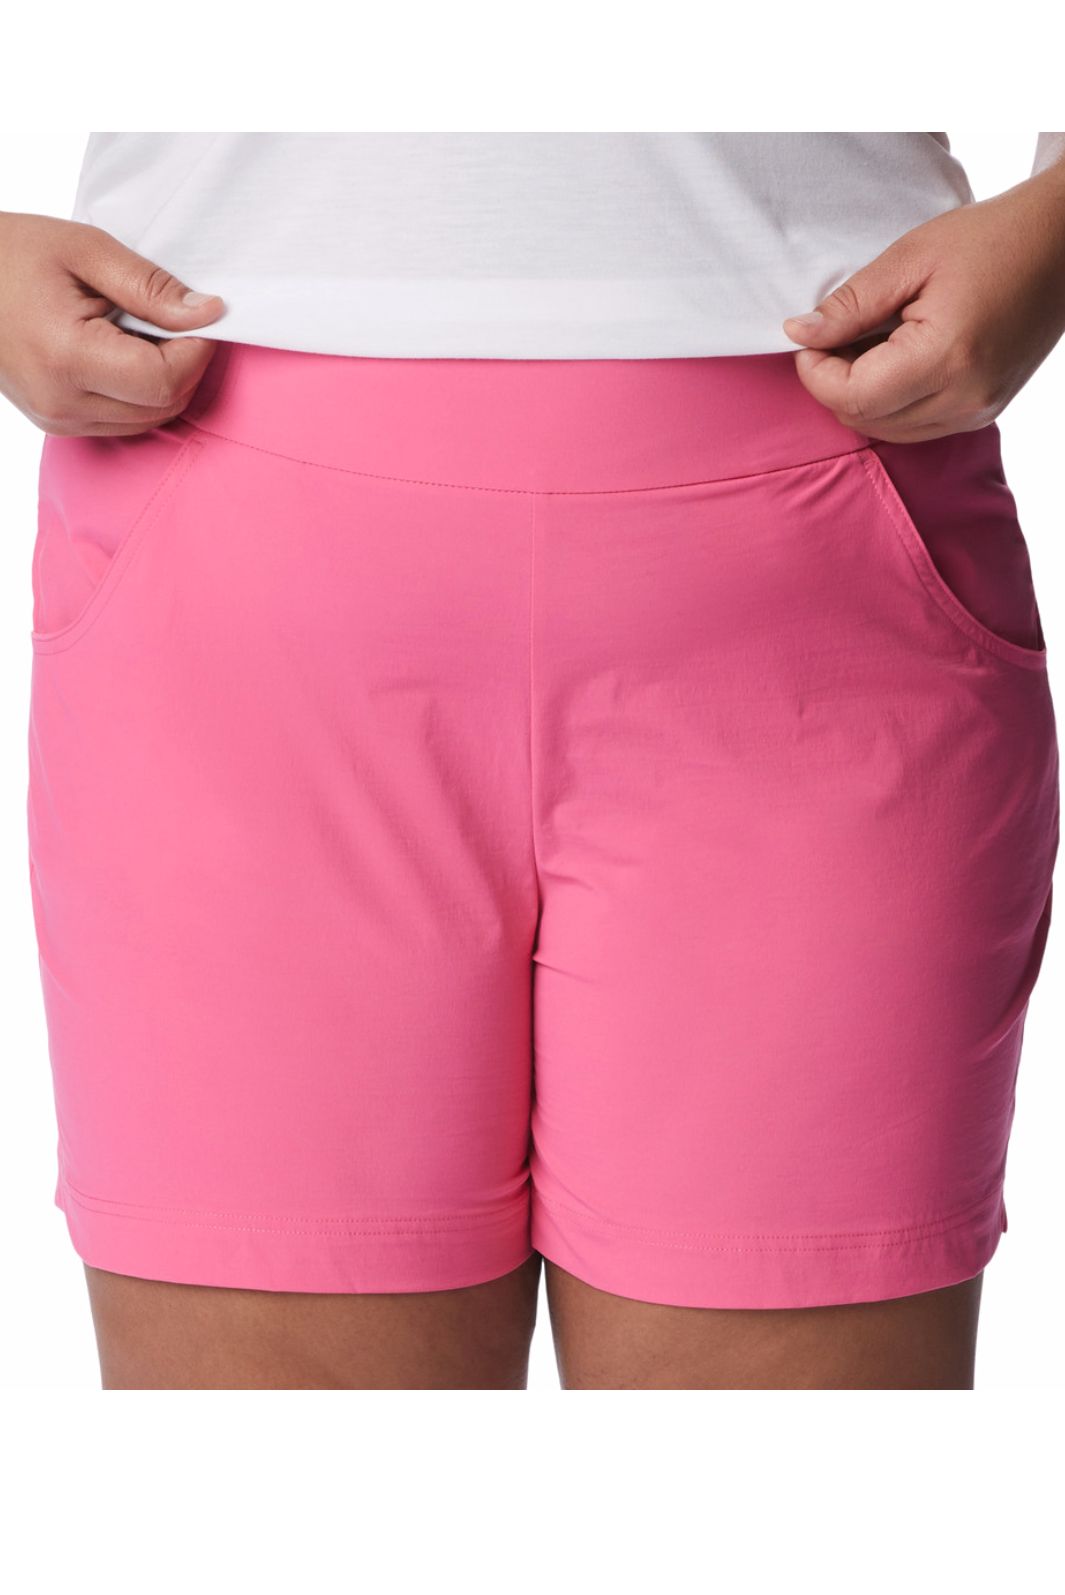 Short Anytime Casual Taille Plus de Columbia